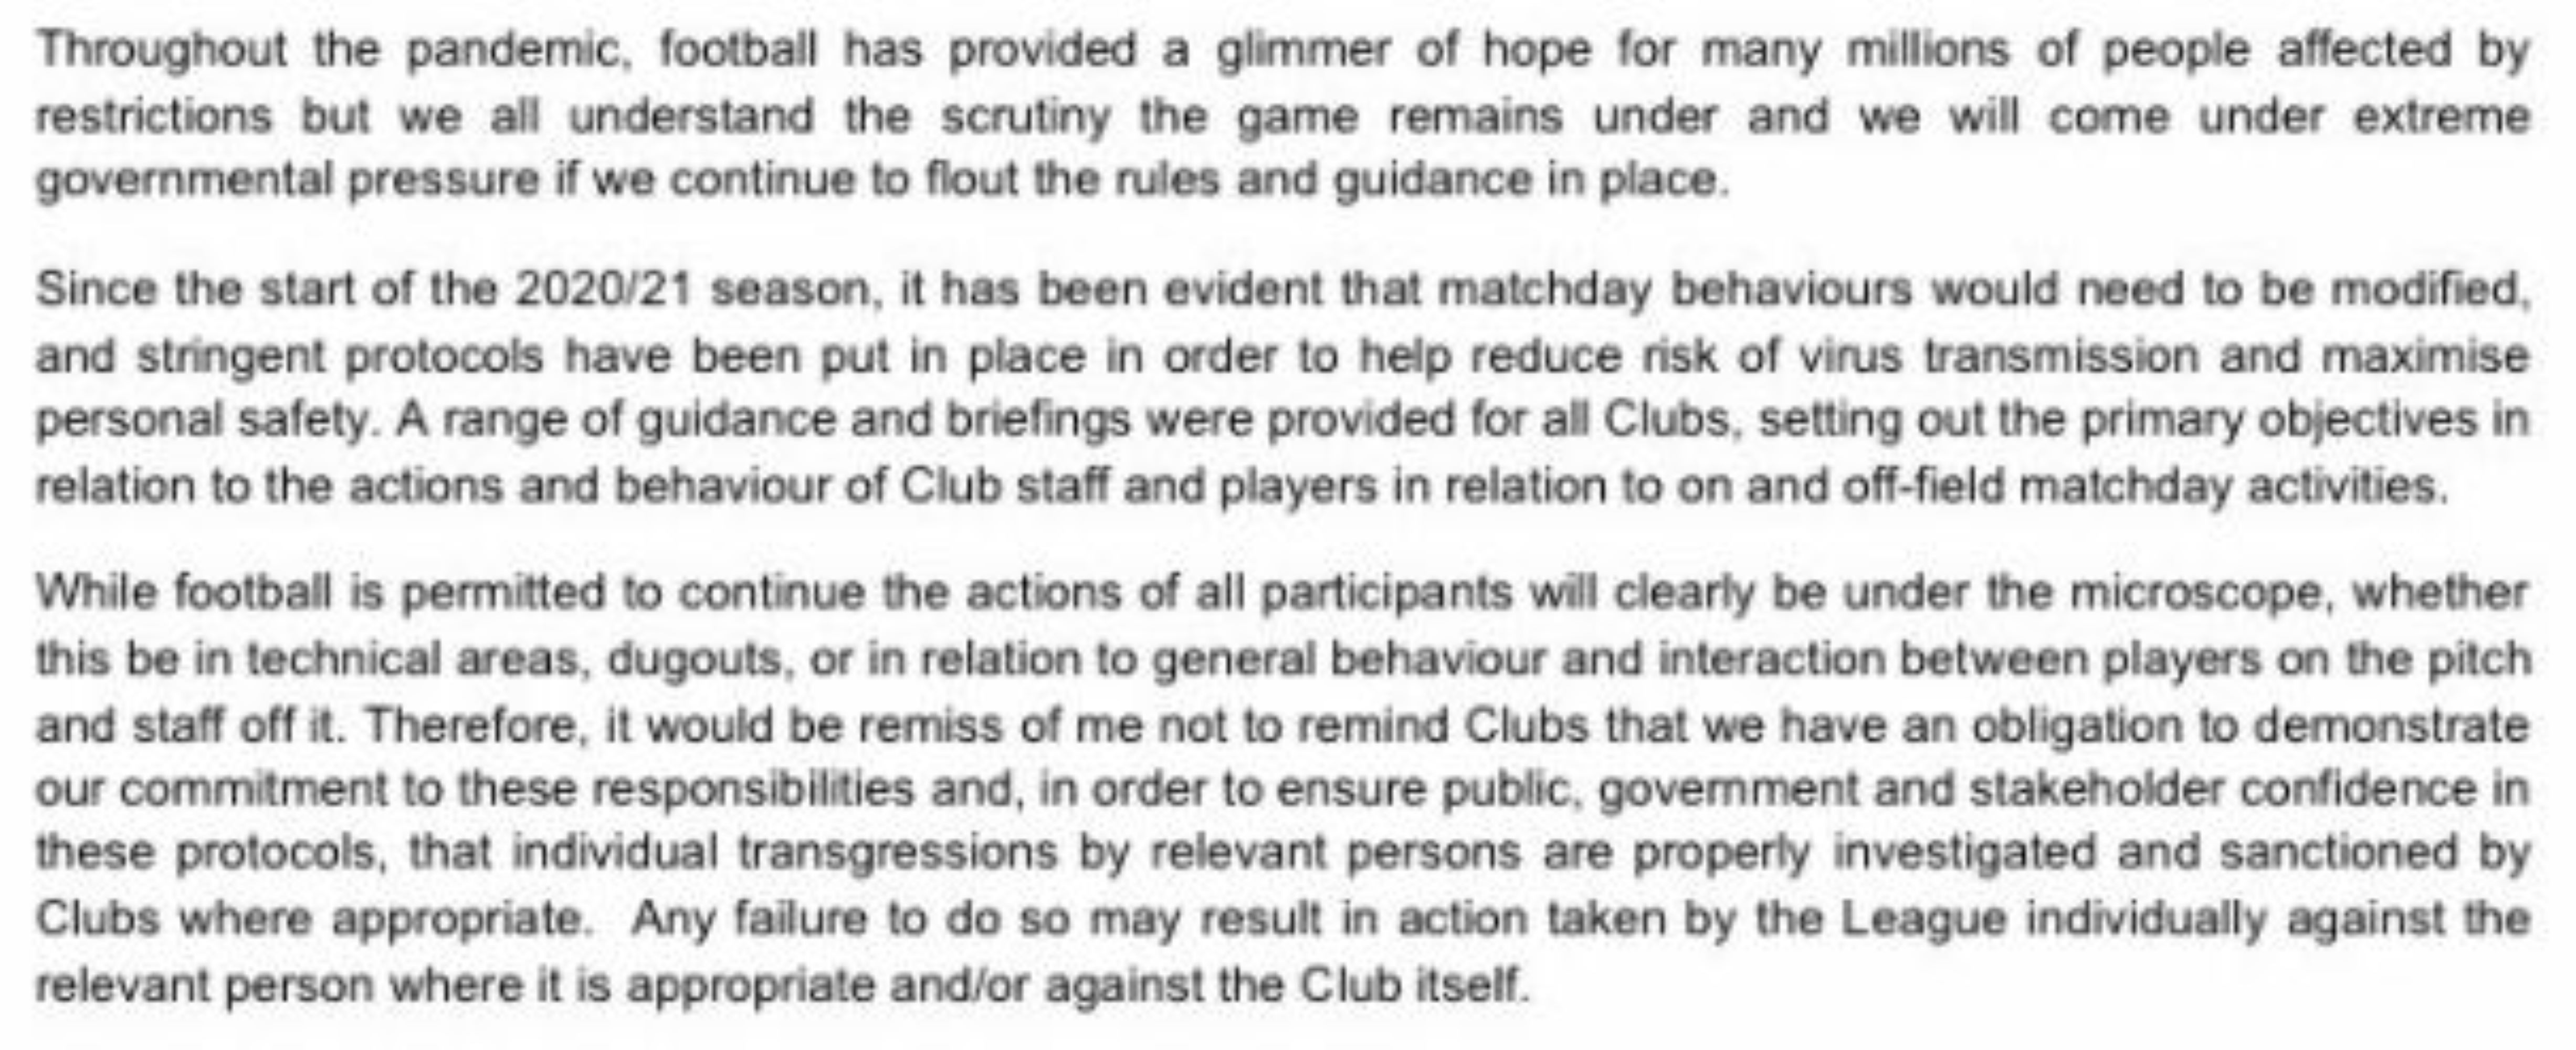 Extract from a letter sent by EFL chief executive Trevor Birch to league clubs